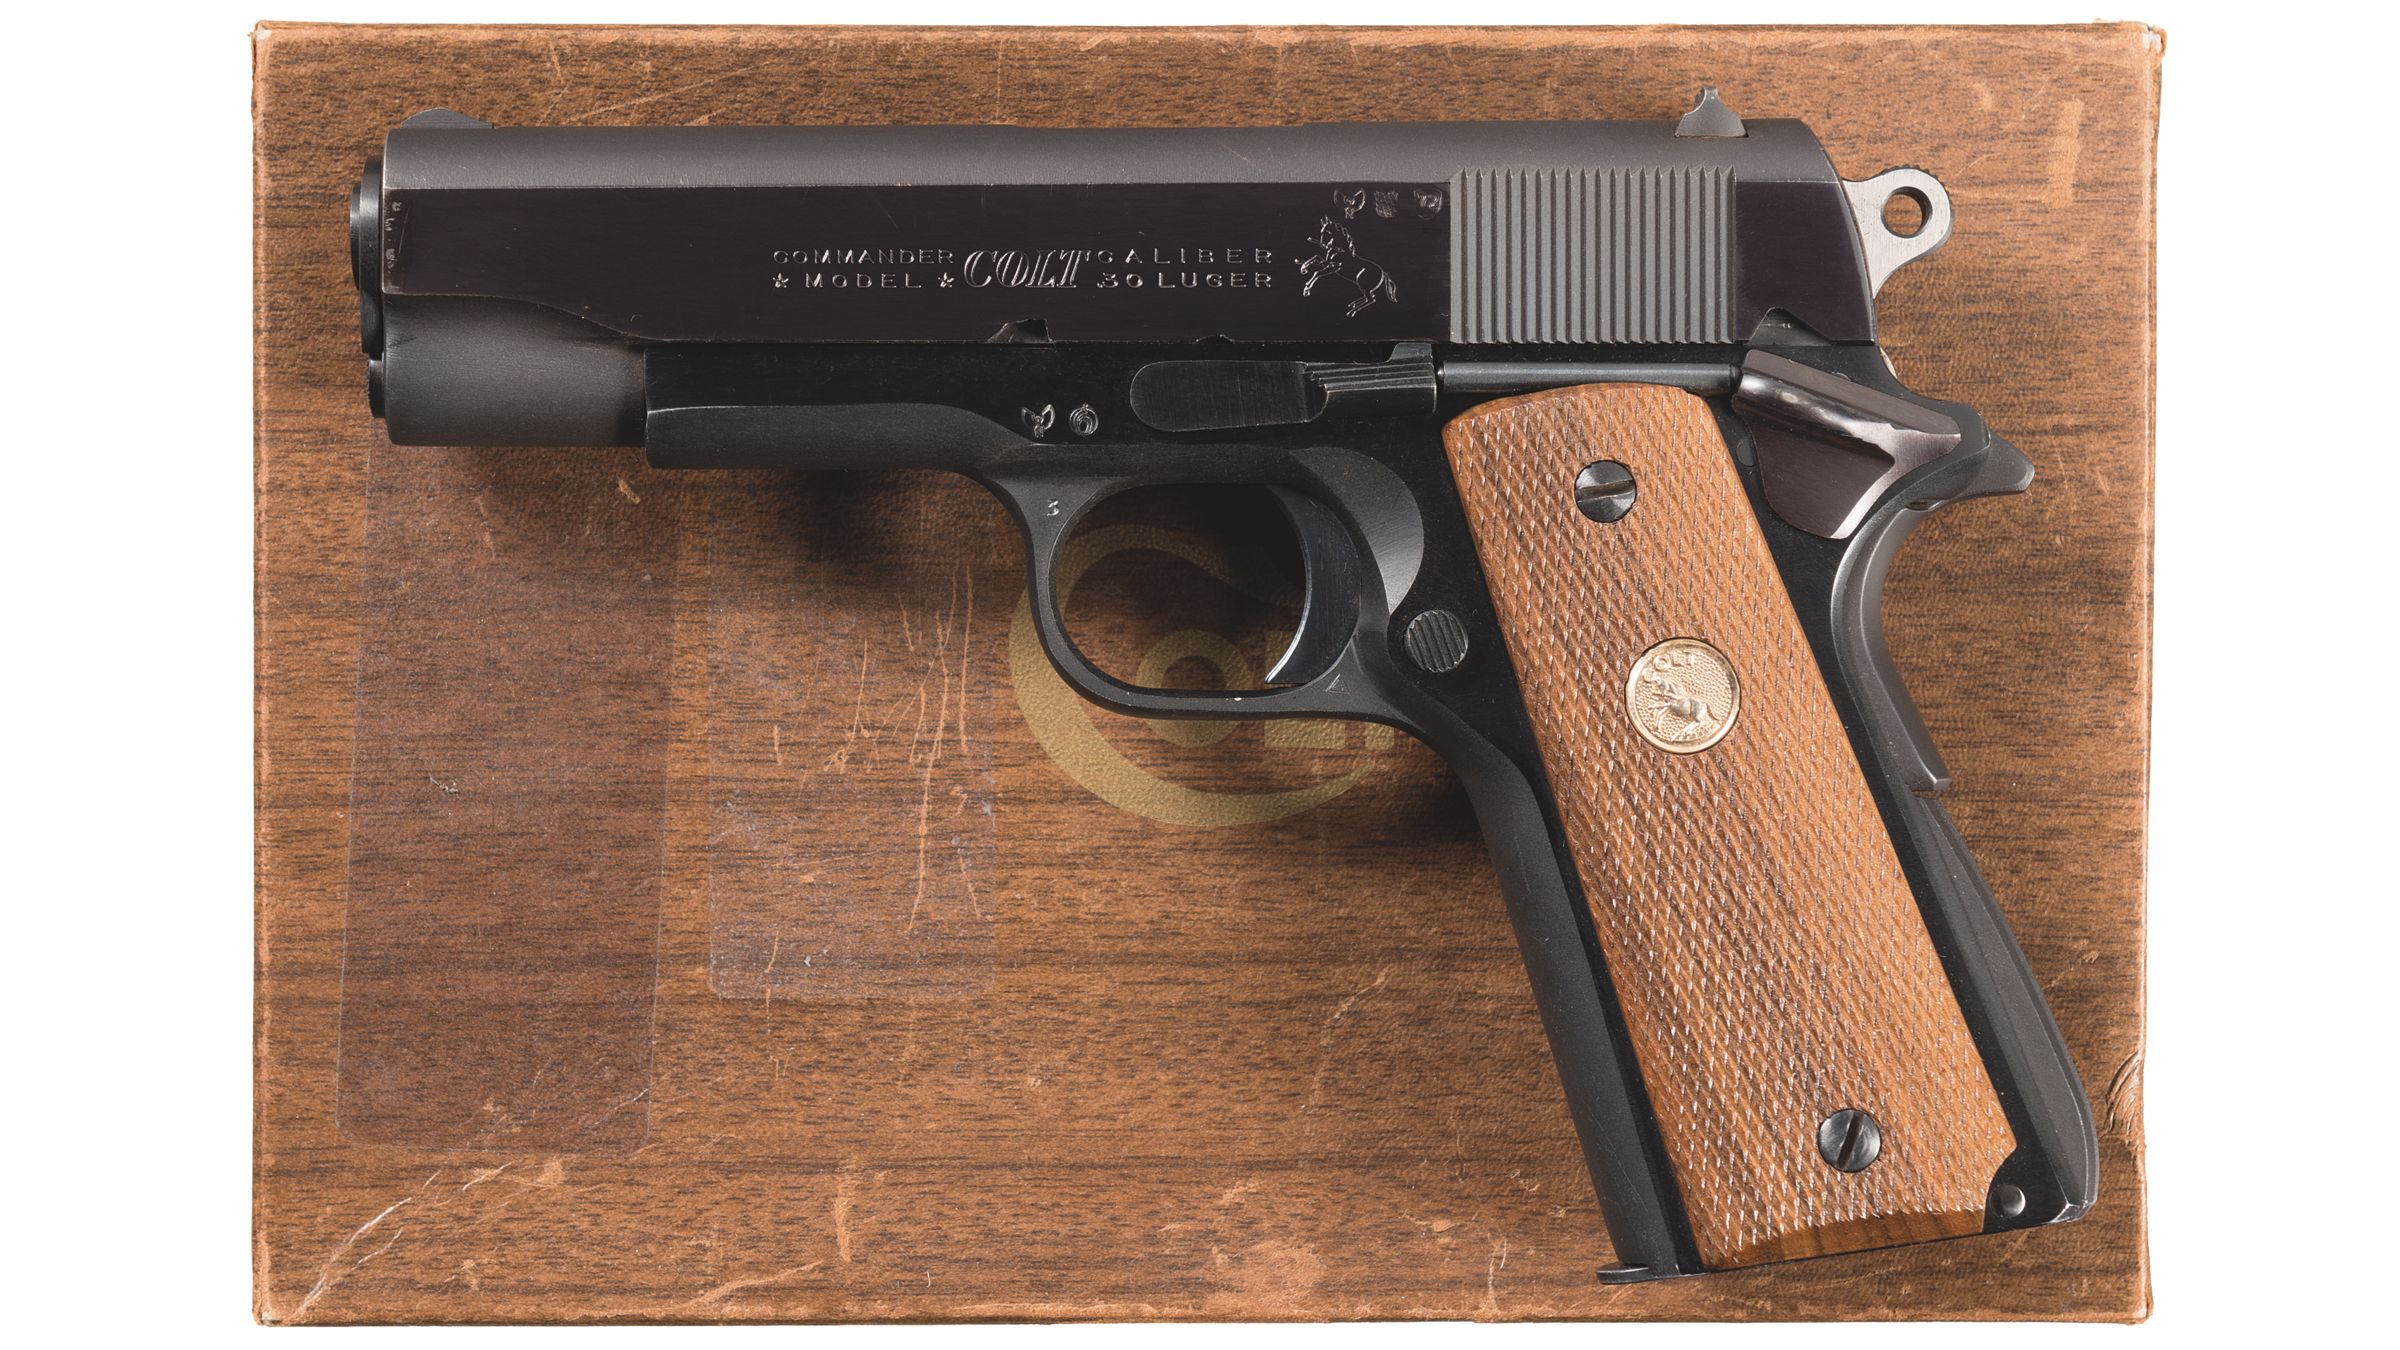 Colt Lightweight Commander, 30 Luger, German Proofed, with Box